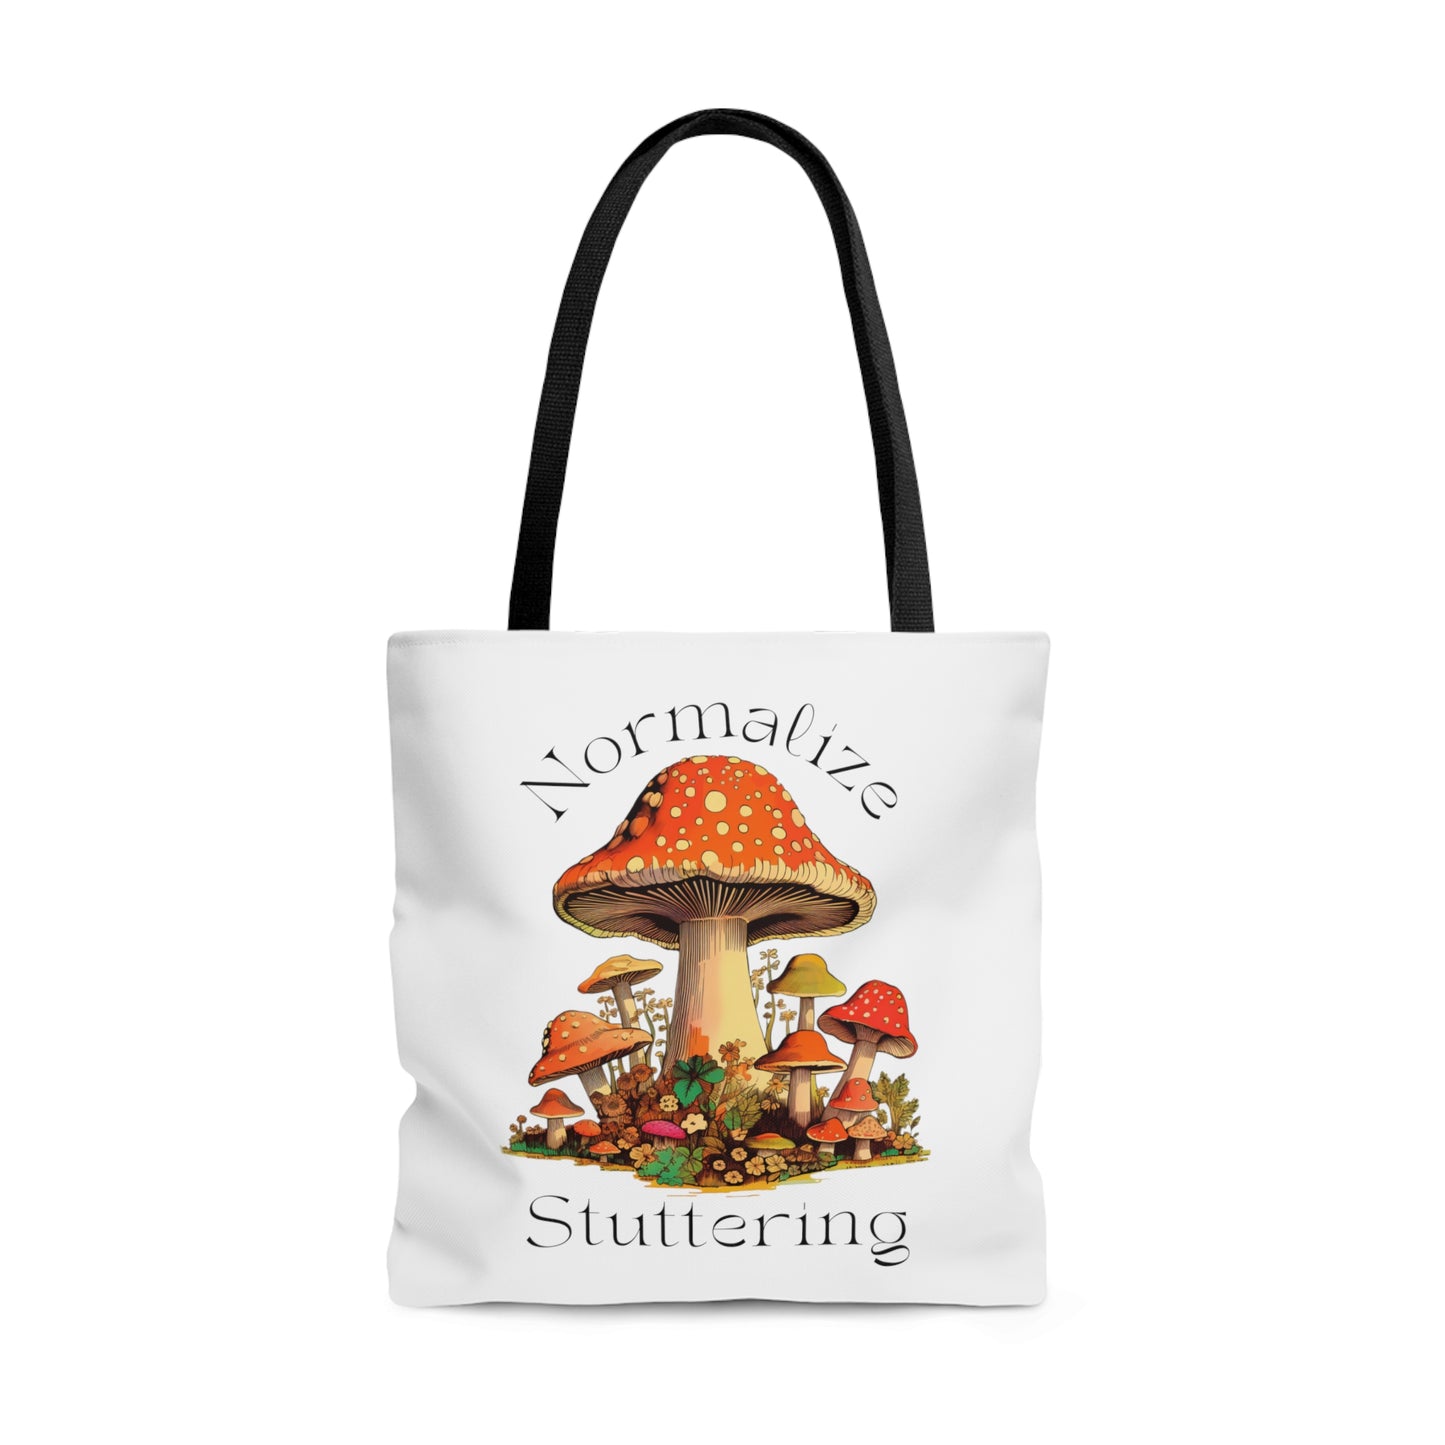 Normalize Stuttering Retro Groovy 70s Mushroom Tote Bag